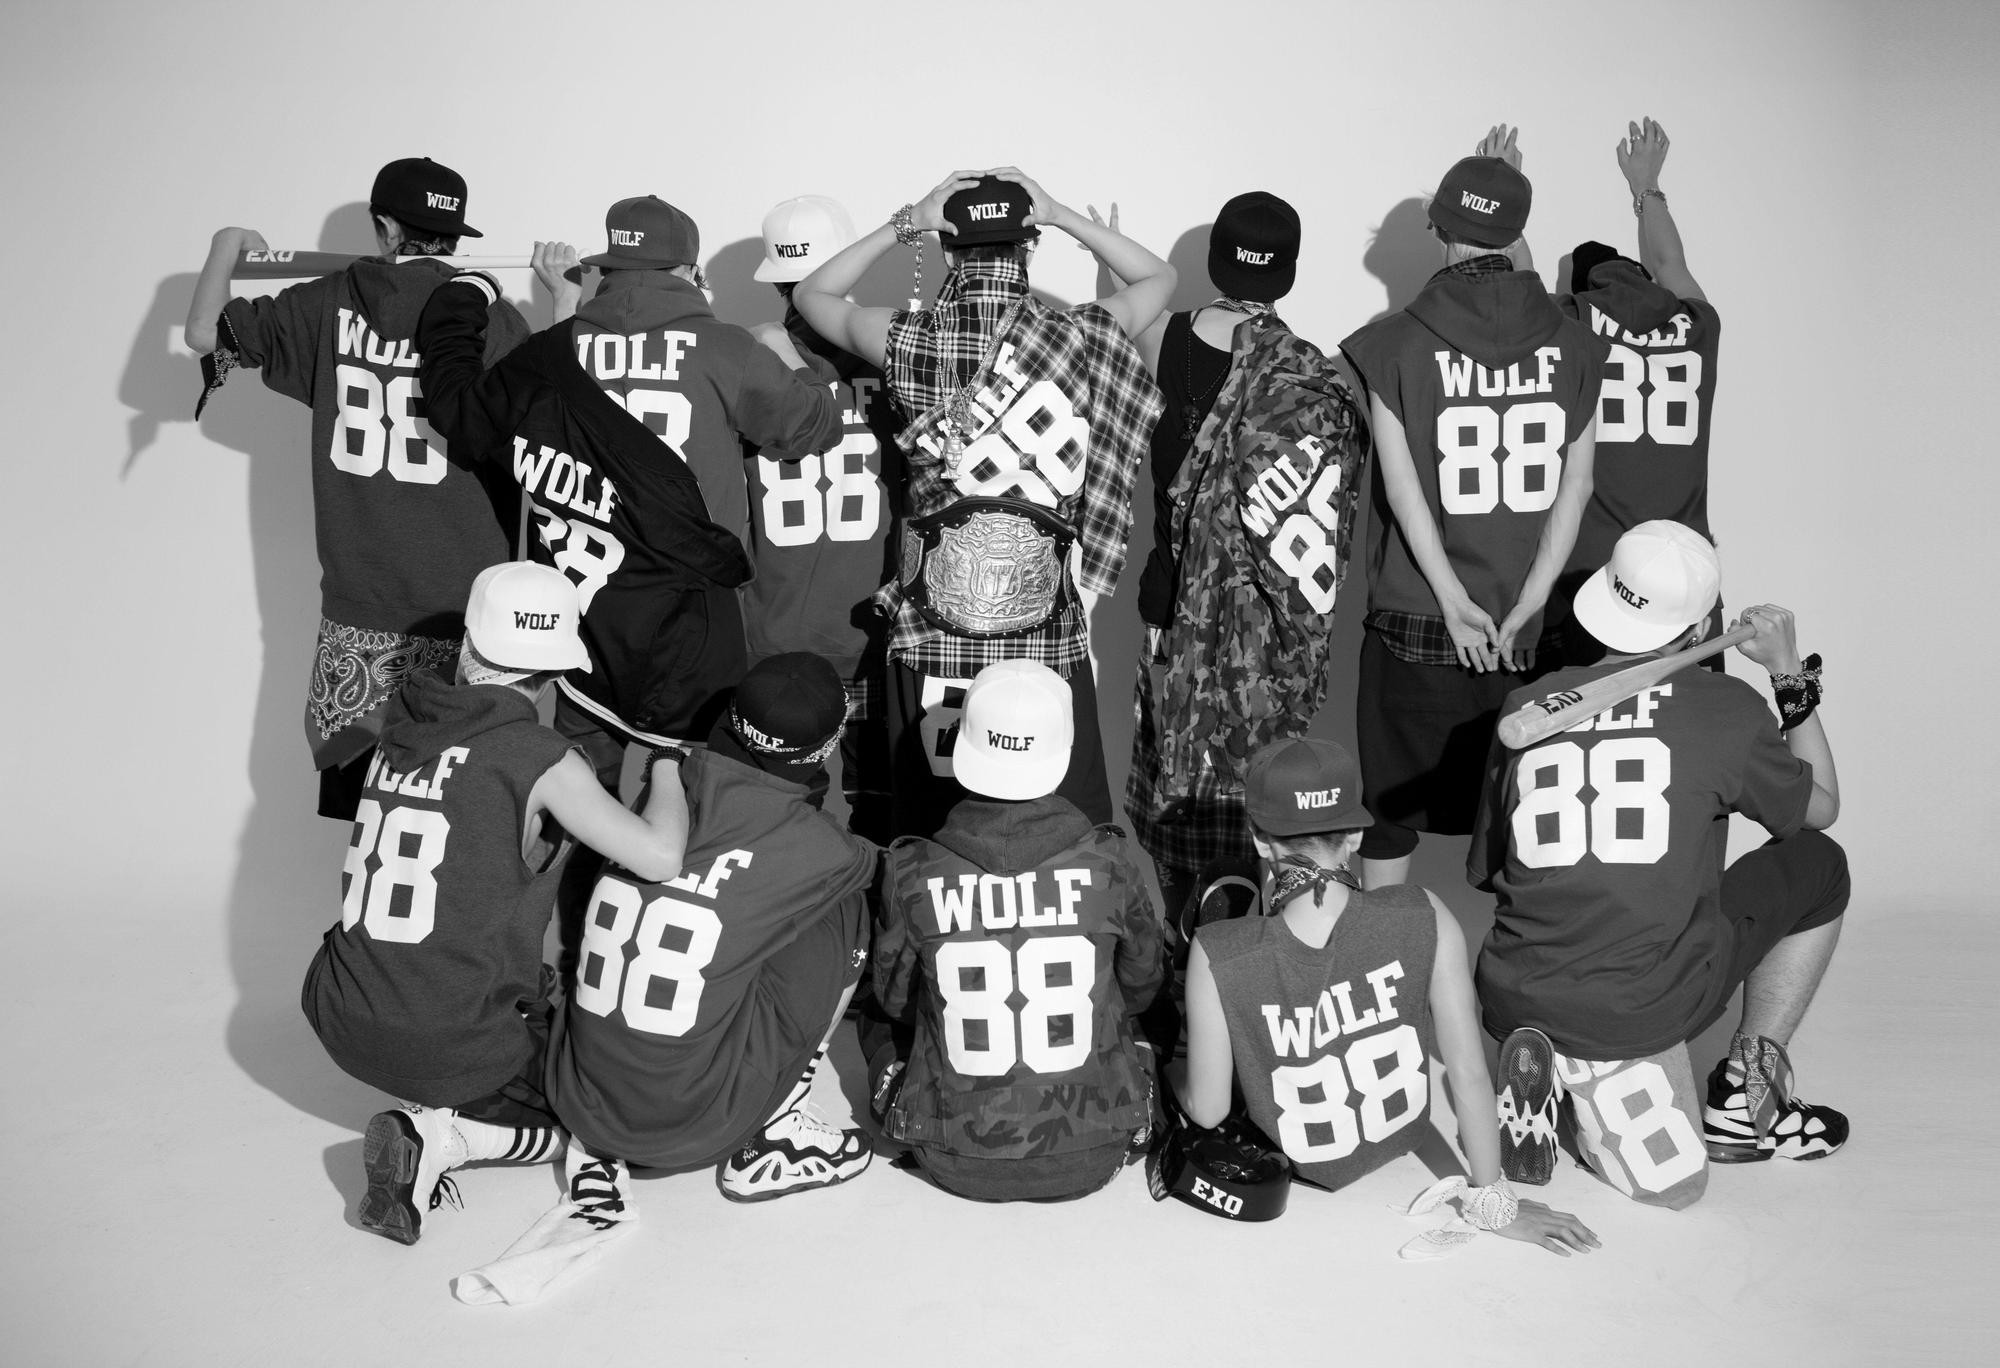 Exo high quality wallpapers